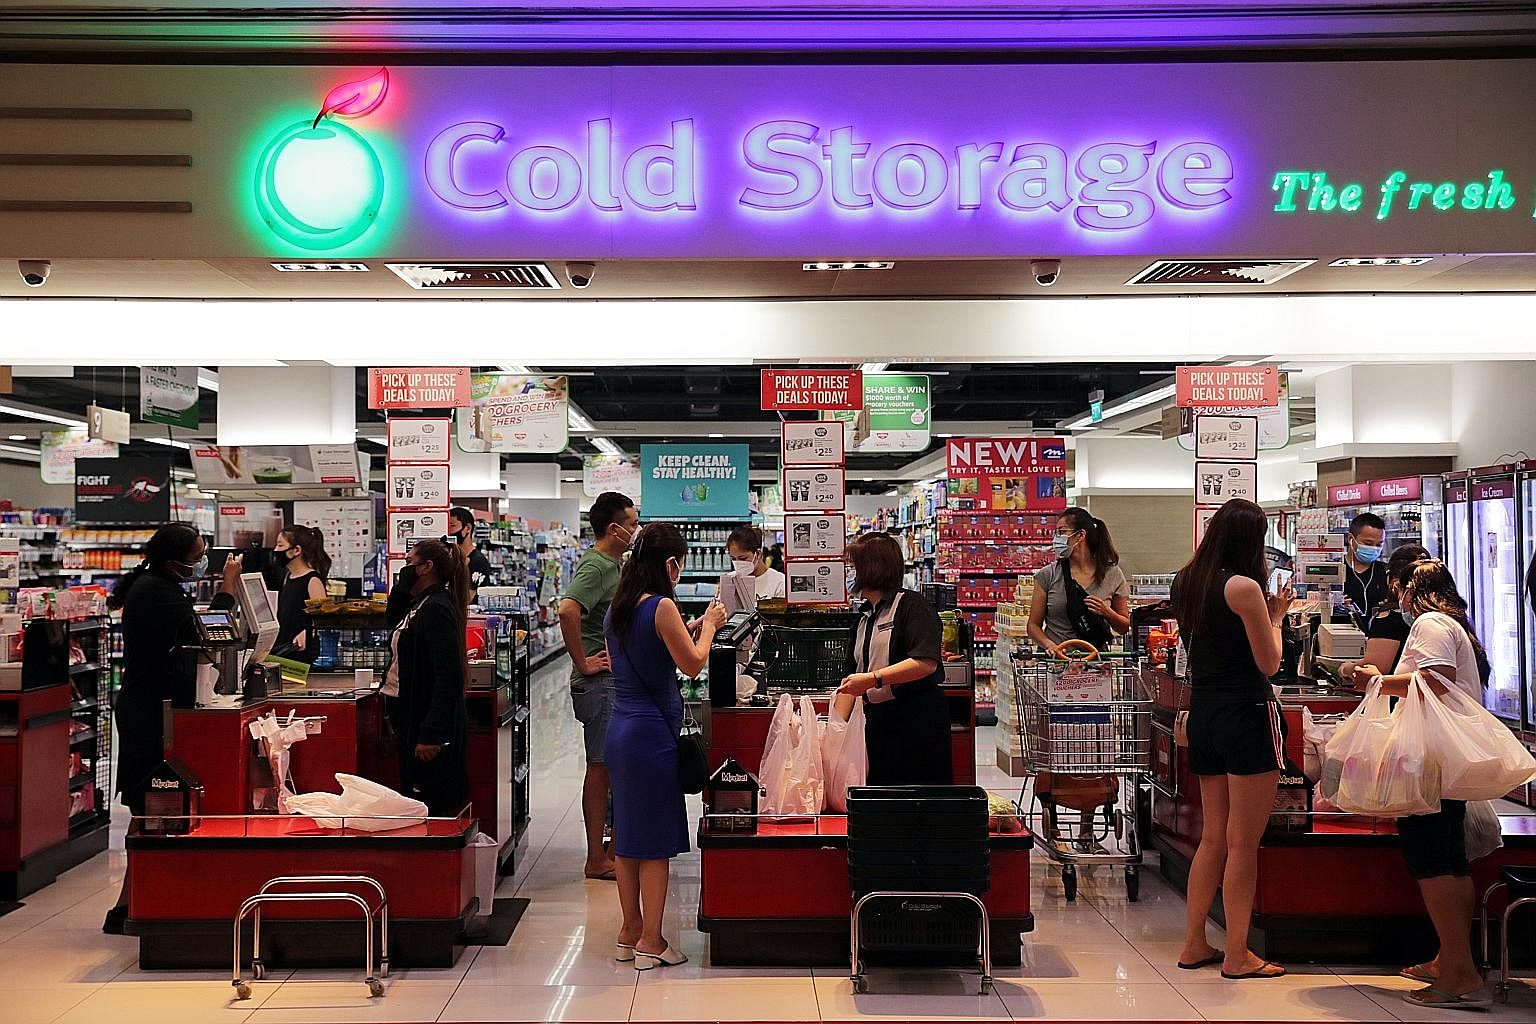 Customers at the checkout section of a supermarket. Singapore's goods and services thttp://staff.straitstimes.com/node/706106/edit?content_lock_token=KPrL2IMW04fAERmwThxSlJF5M5Pa2vax is set to be raised from 7 per cent to 9 per cent between 2022 and 2025.